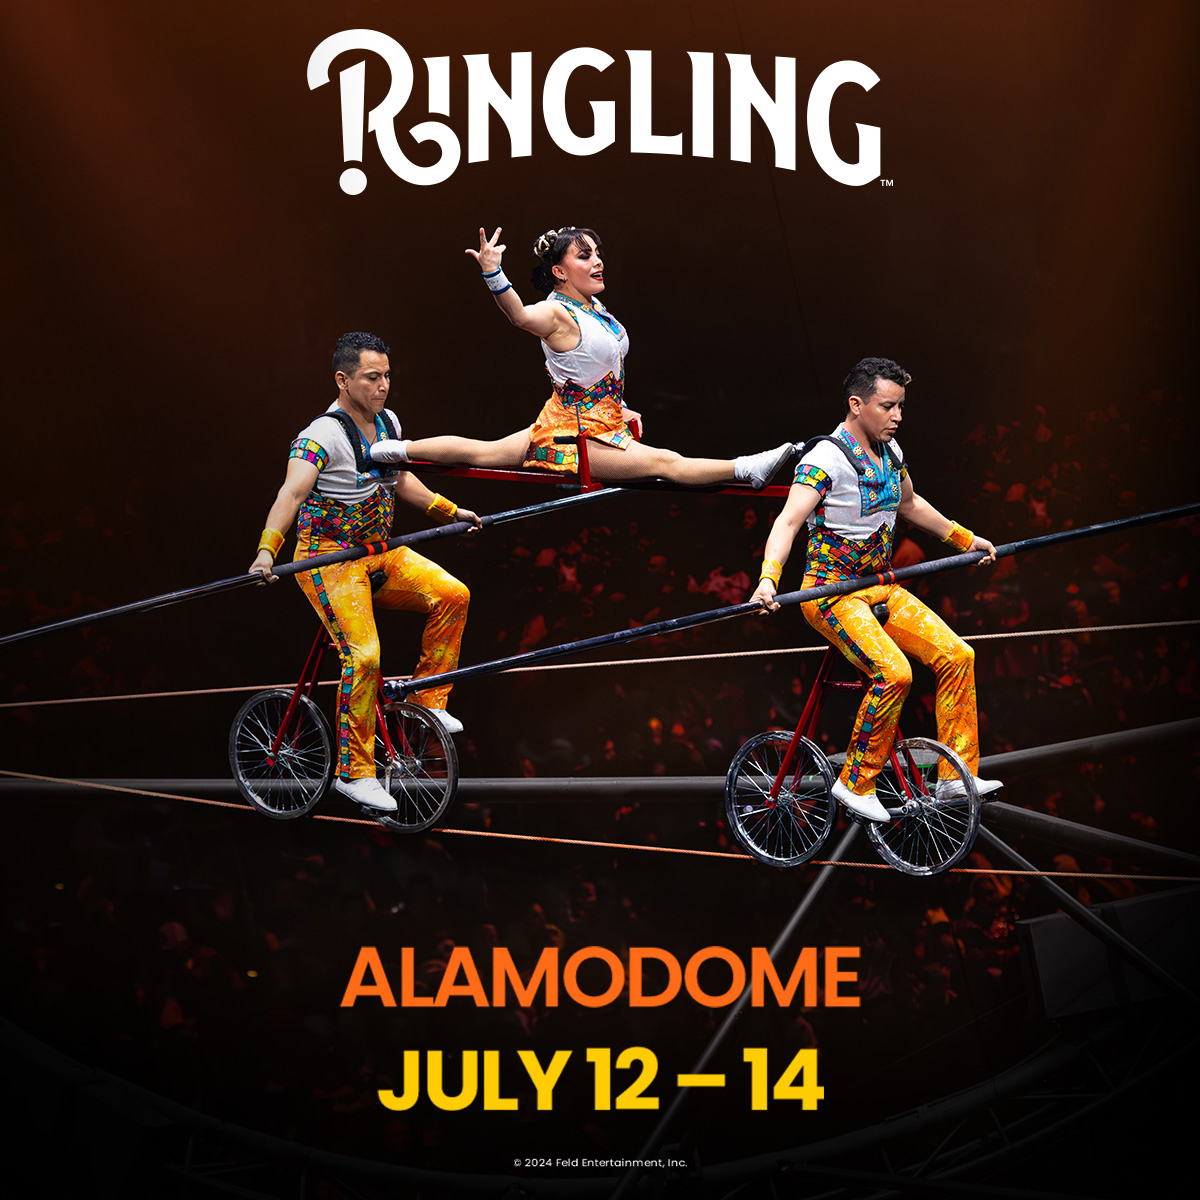 ✨ The legendary Ringling Bros. and Barnum & Bailey® returns! Experience the unparalleled thrills of The Greatest Show On Earth at the Alamodome, July 12-14. 🎟 Tickets on sale NOW! ⭐ 🎟 ticketmaster.com or Alamodome Box Office Mon. - Fri. 10AM - 4PM